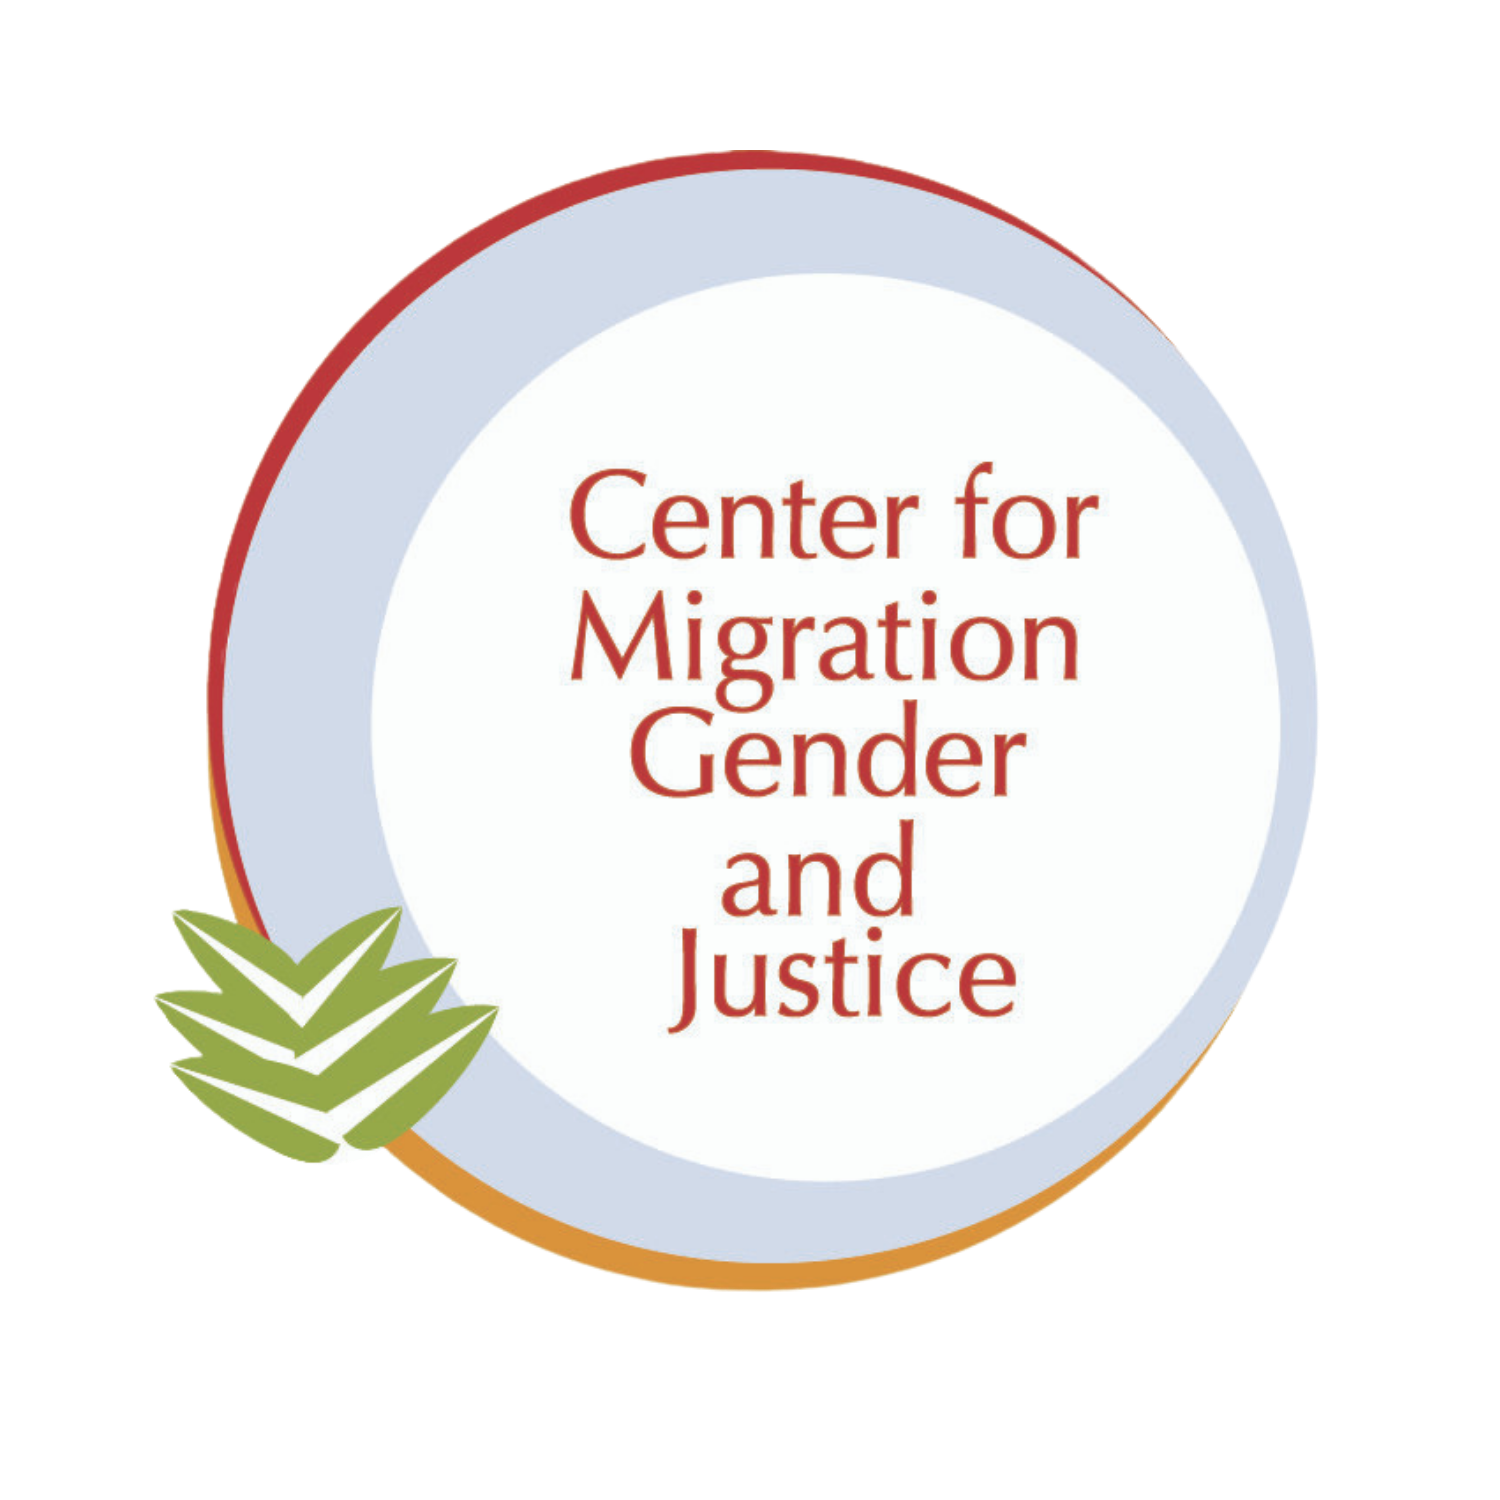 The Center for Migration, Gender, and Justice